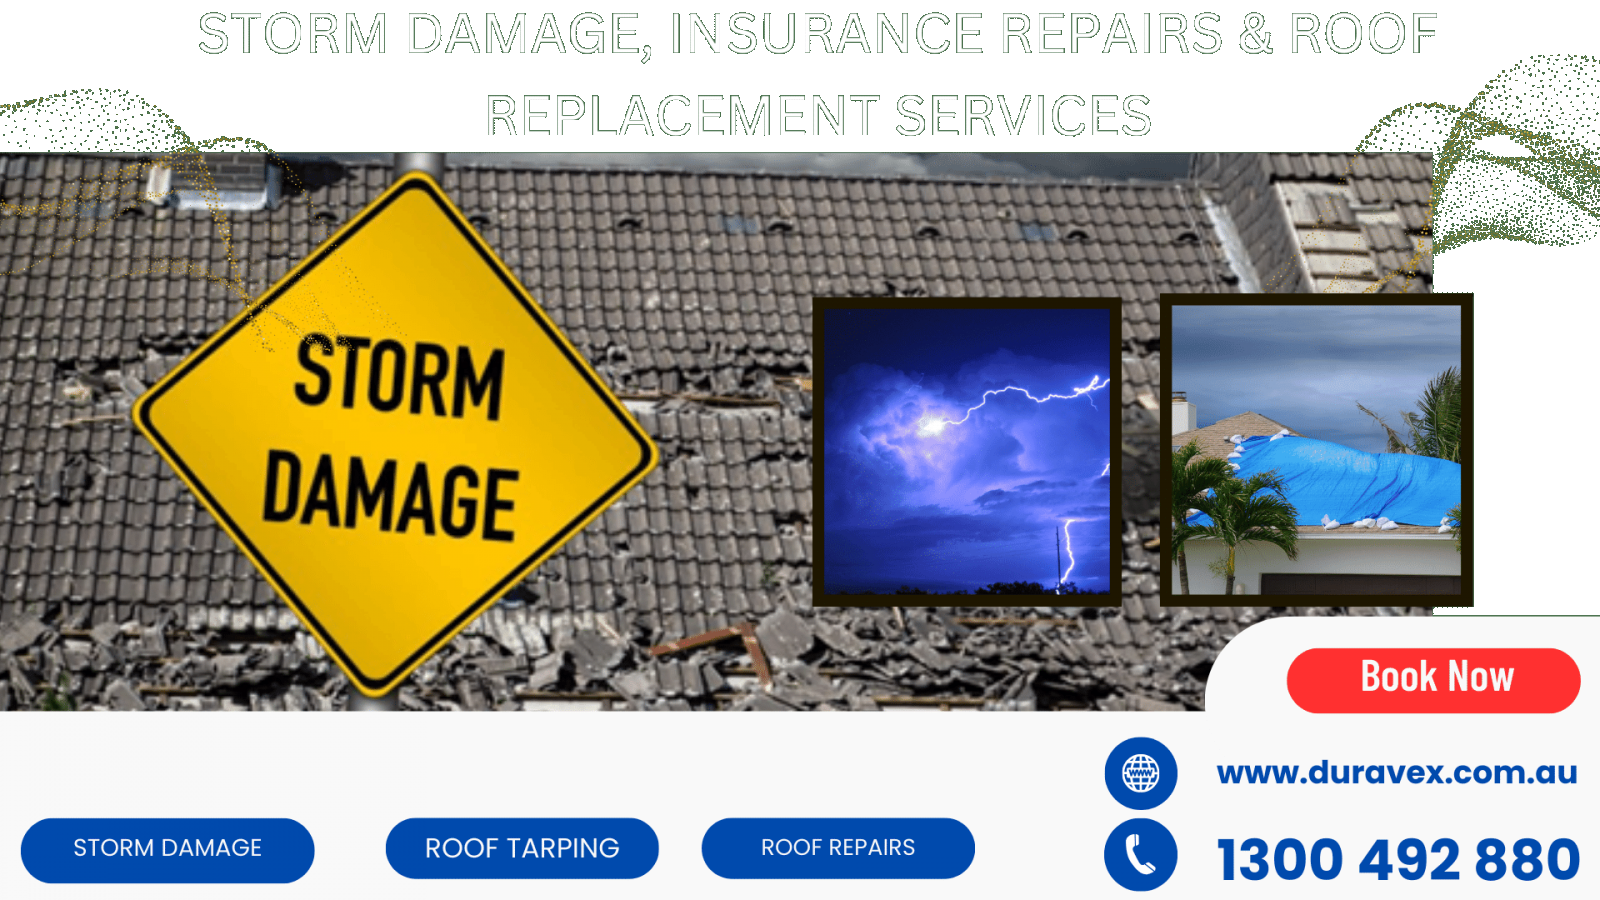 Storm Damage, Insurance Repairs & Roof Replacement Services